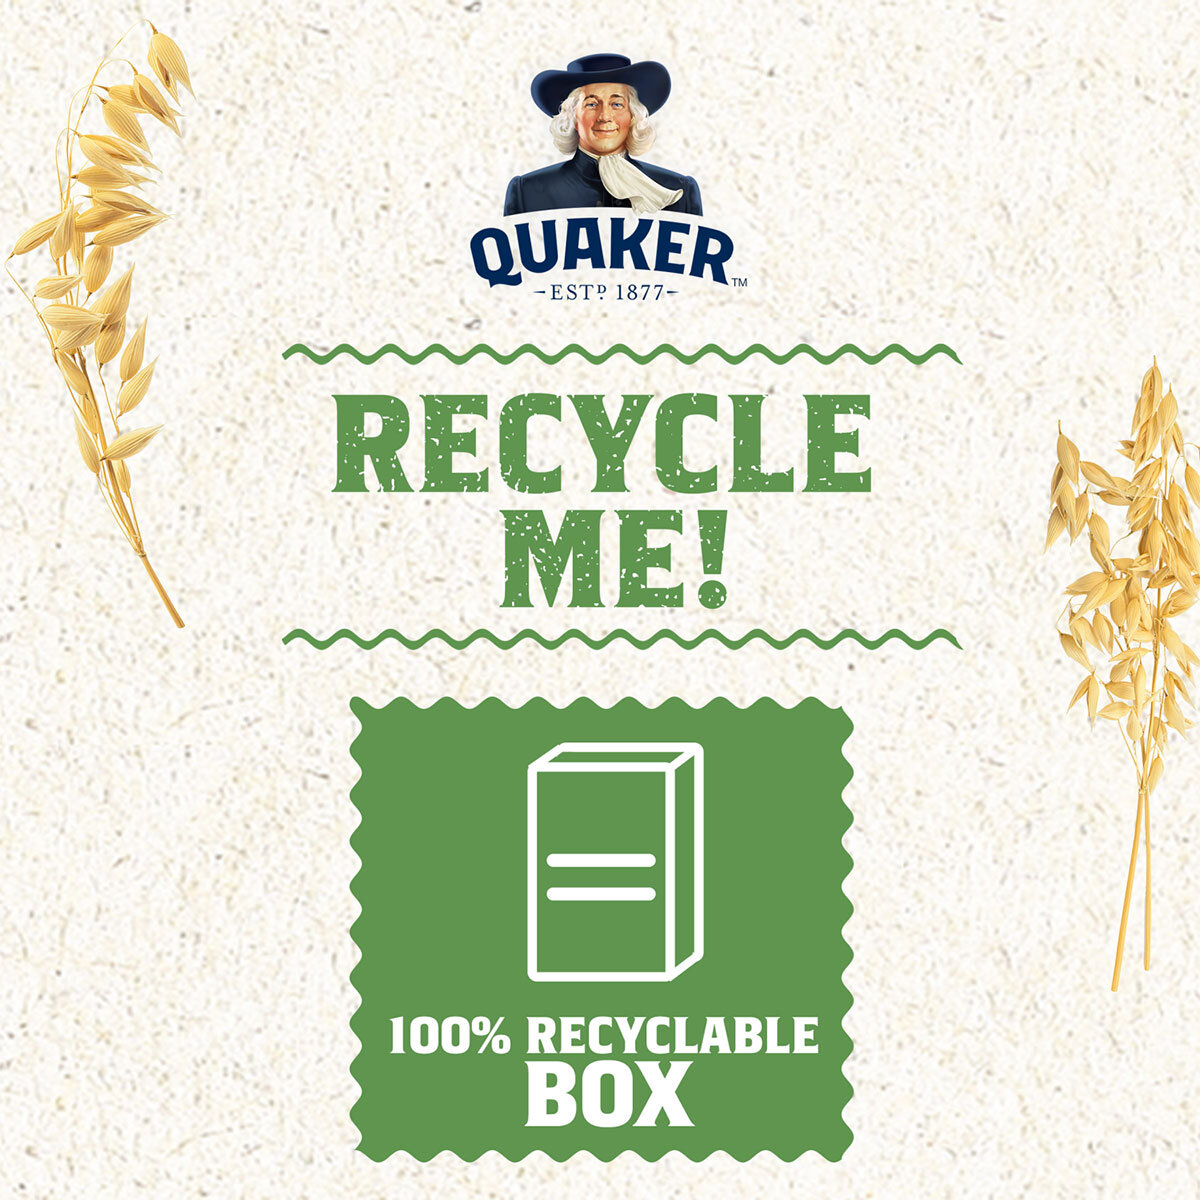 Recyclable Box